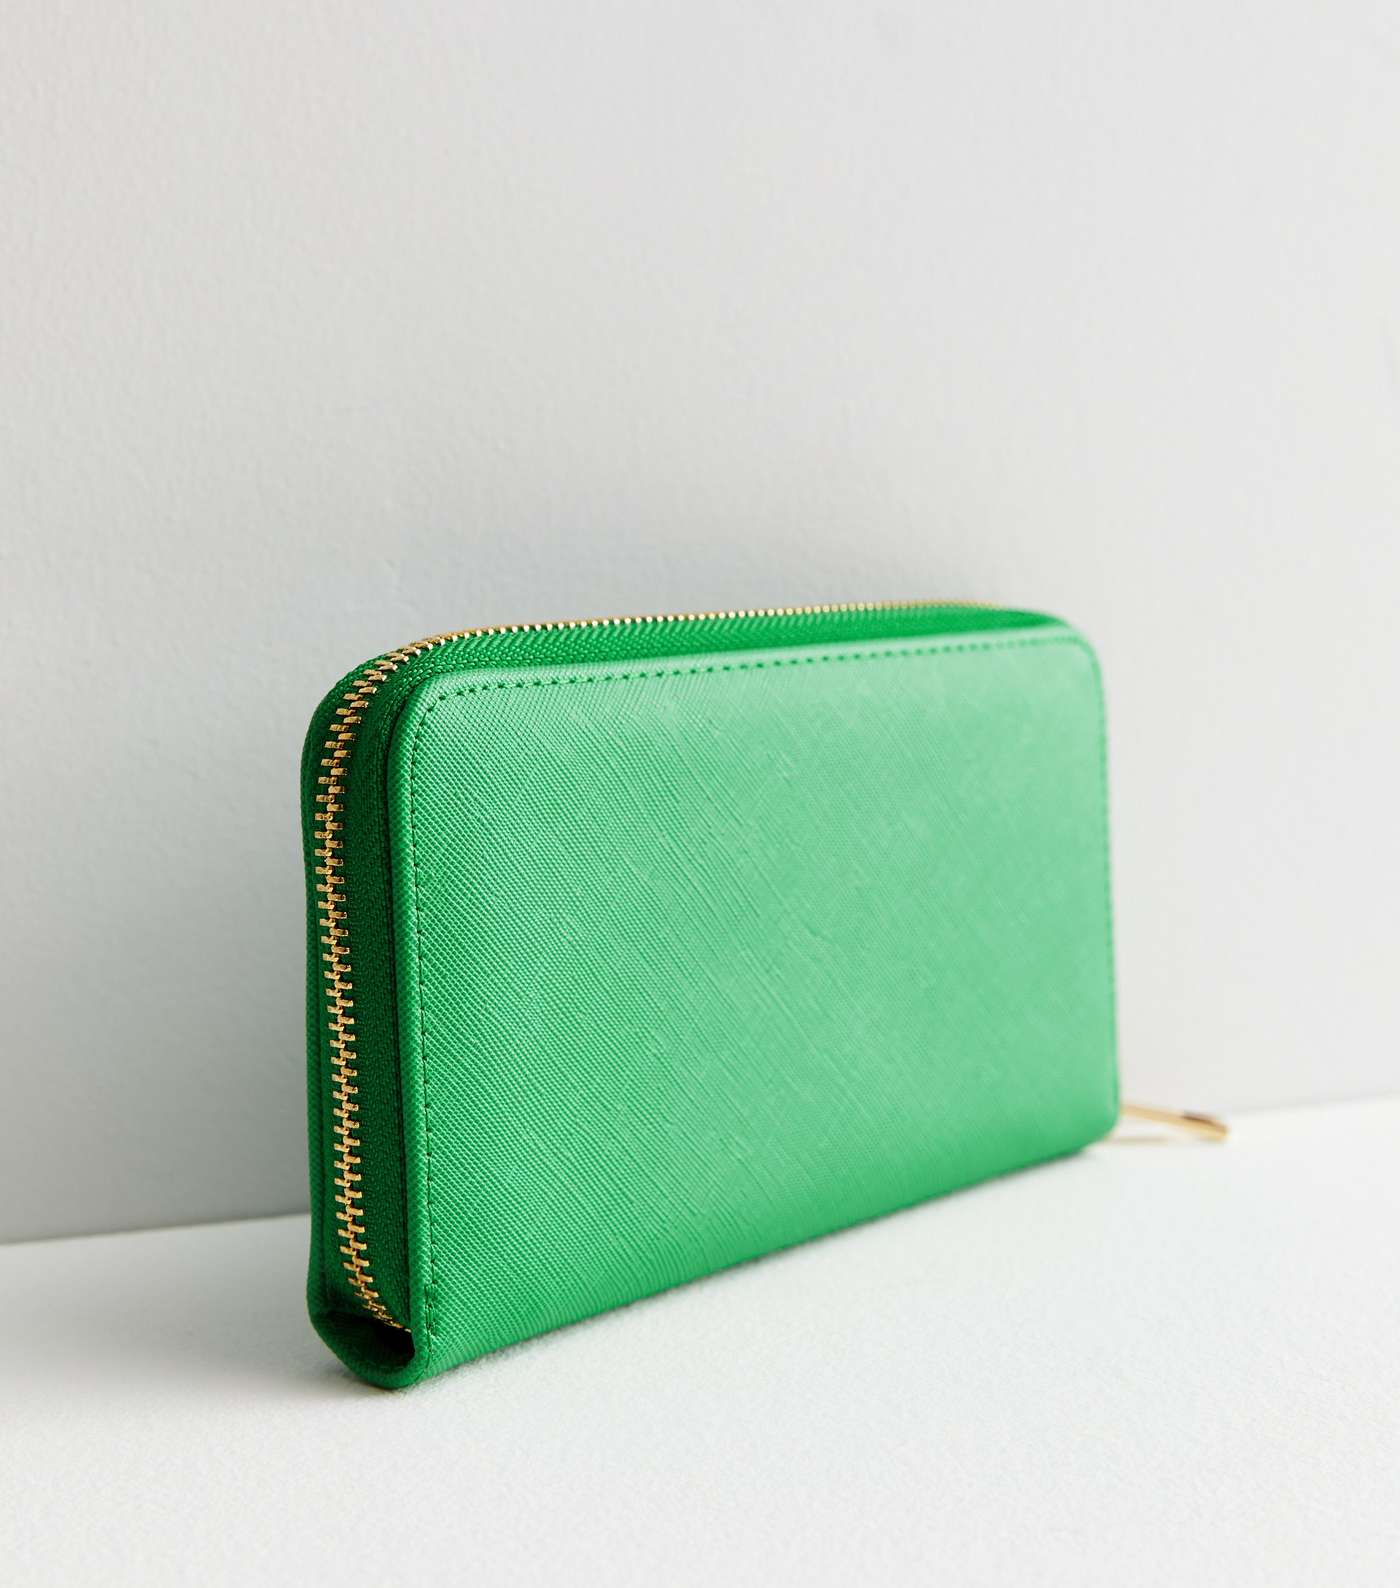 Green Leather-Look Textured Large Zip Purse Image 2